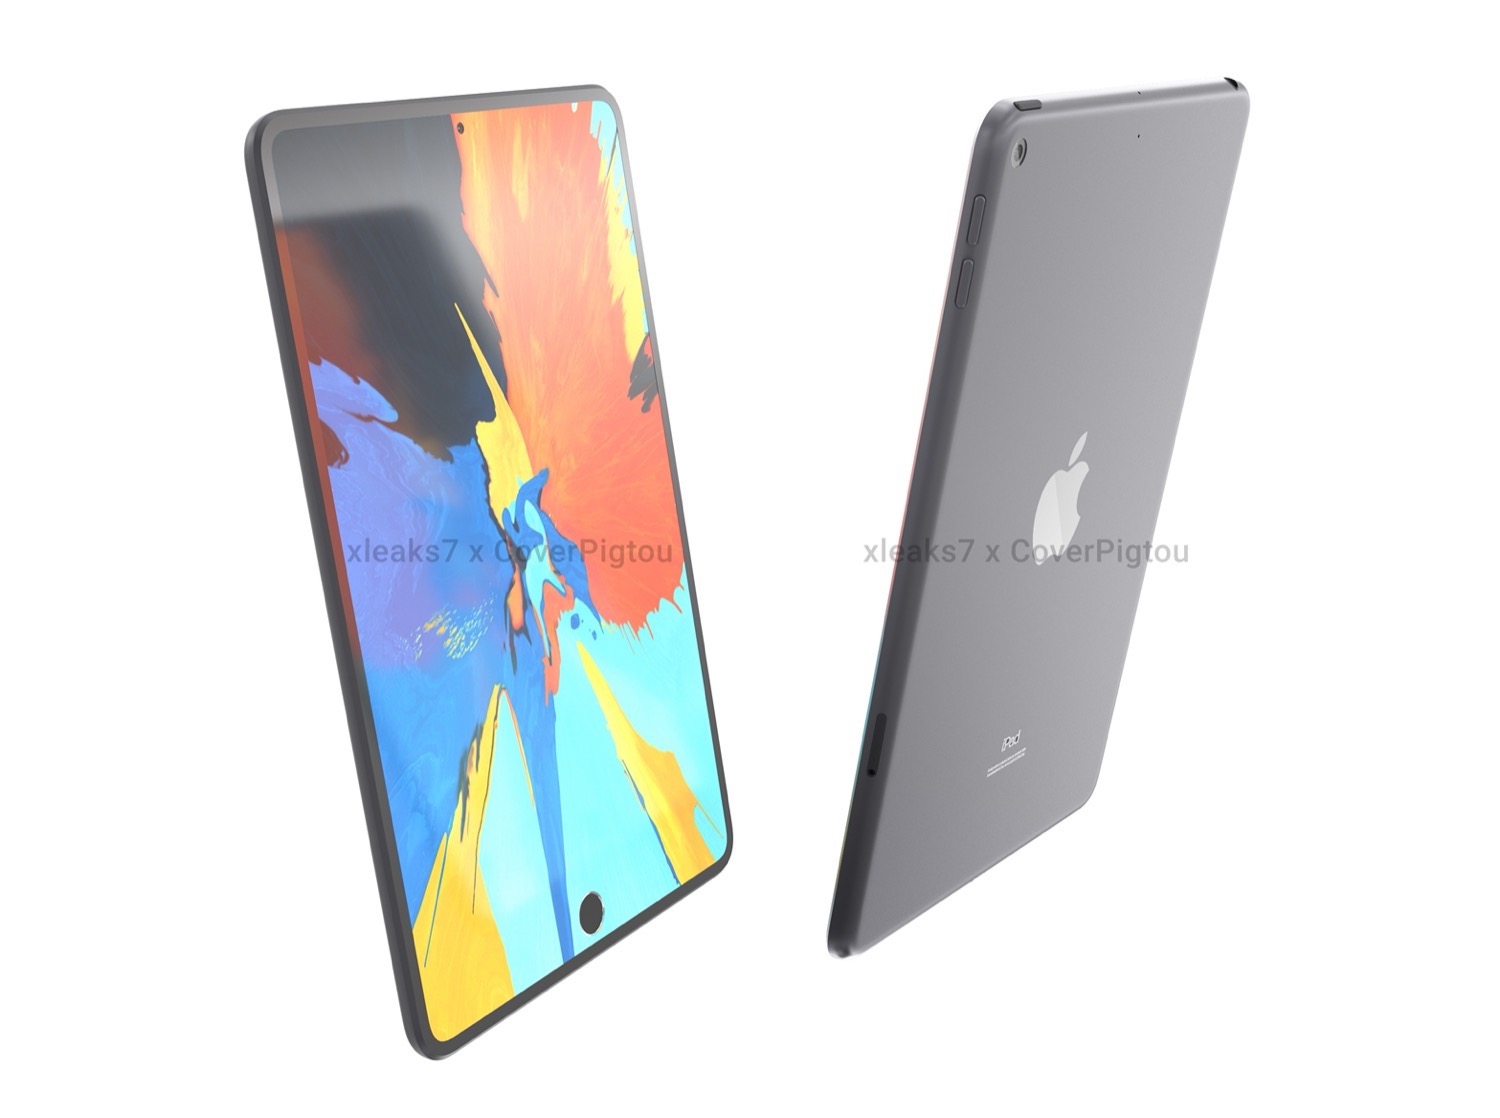 New iPad Mini 6 rumors mention an A15 chip and a Smart Connector 